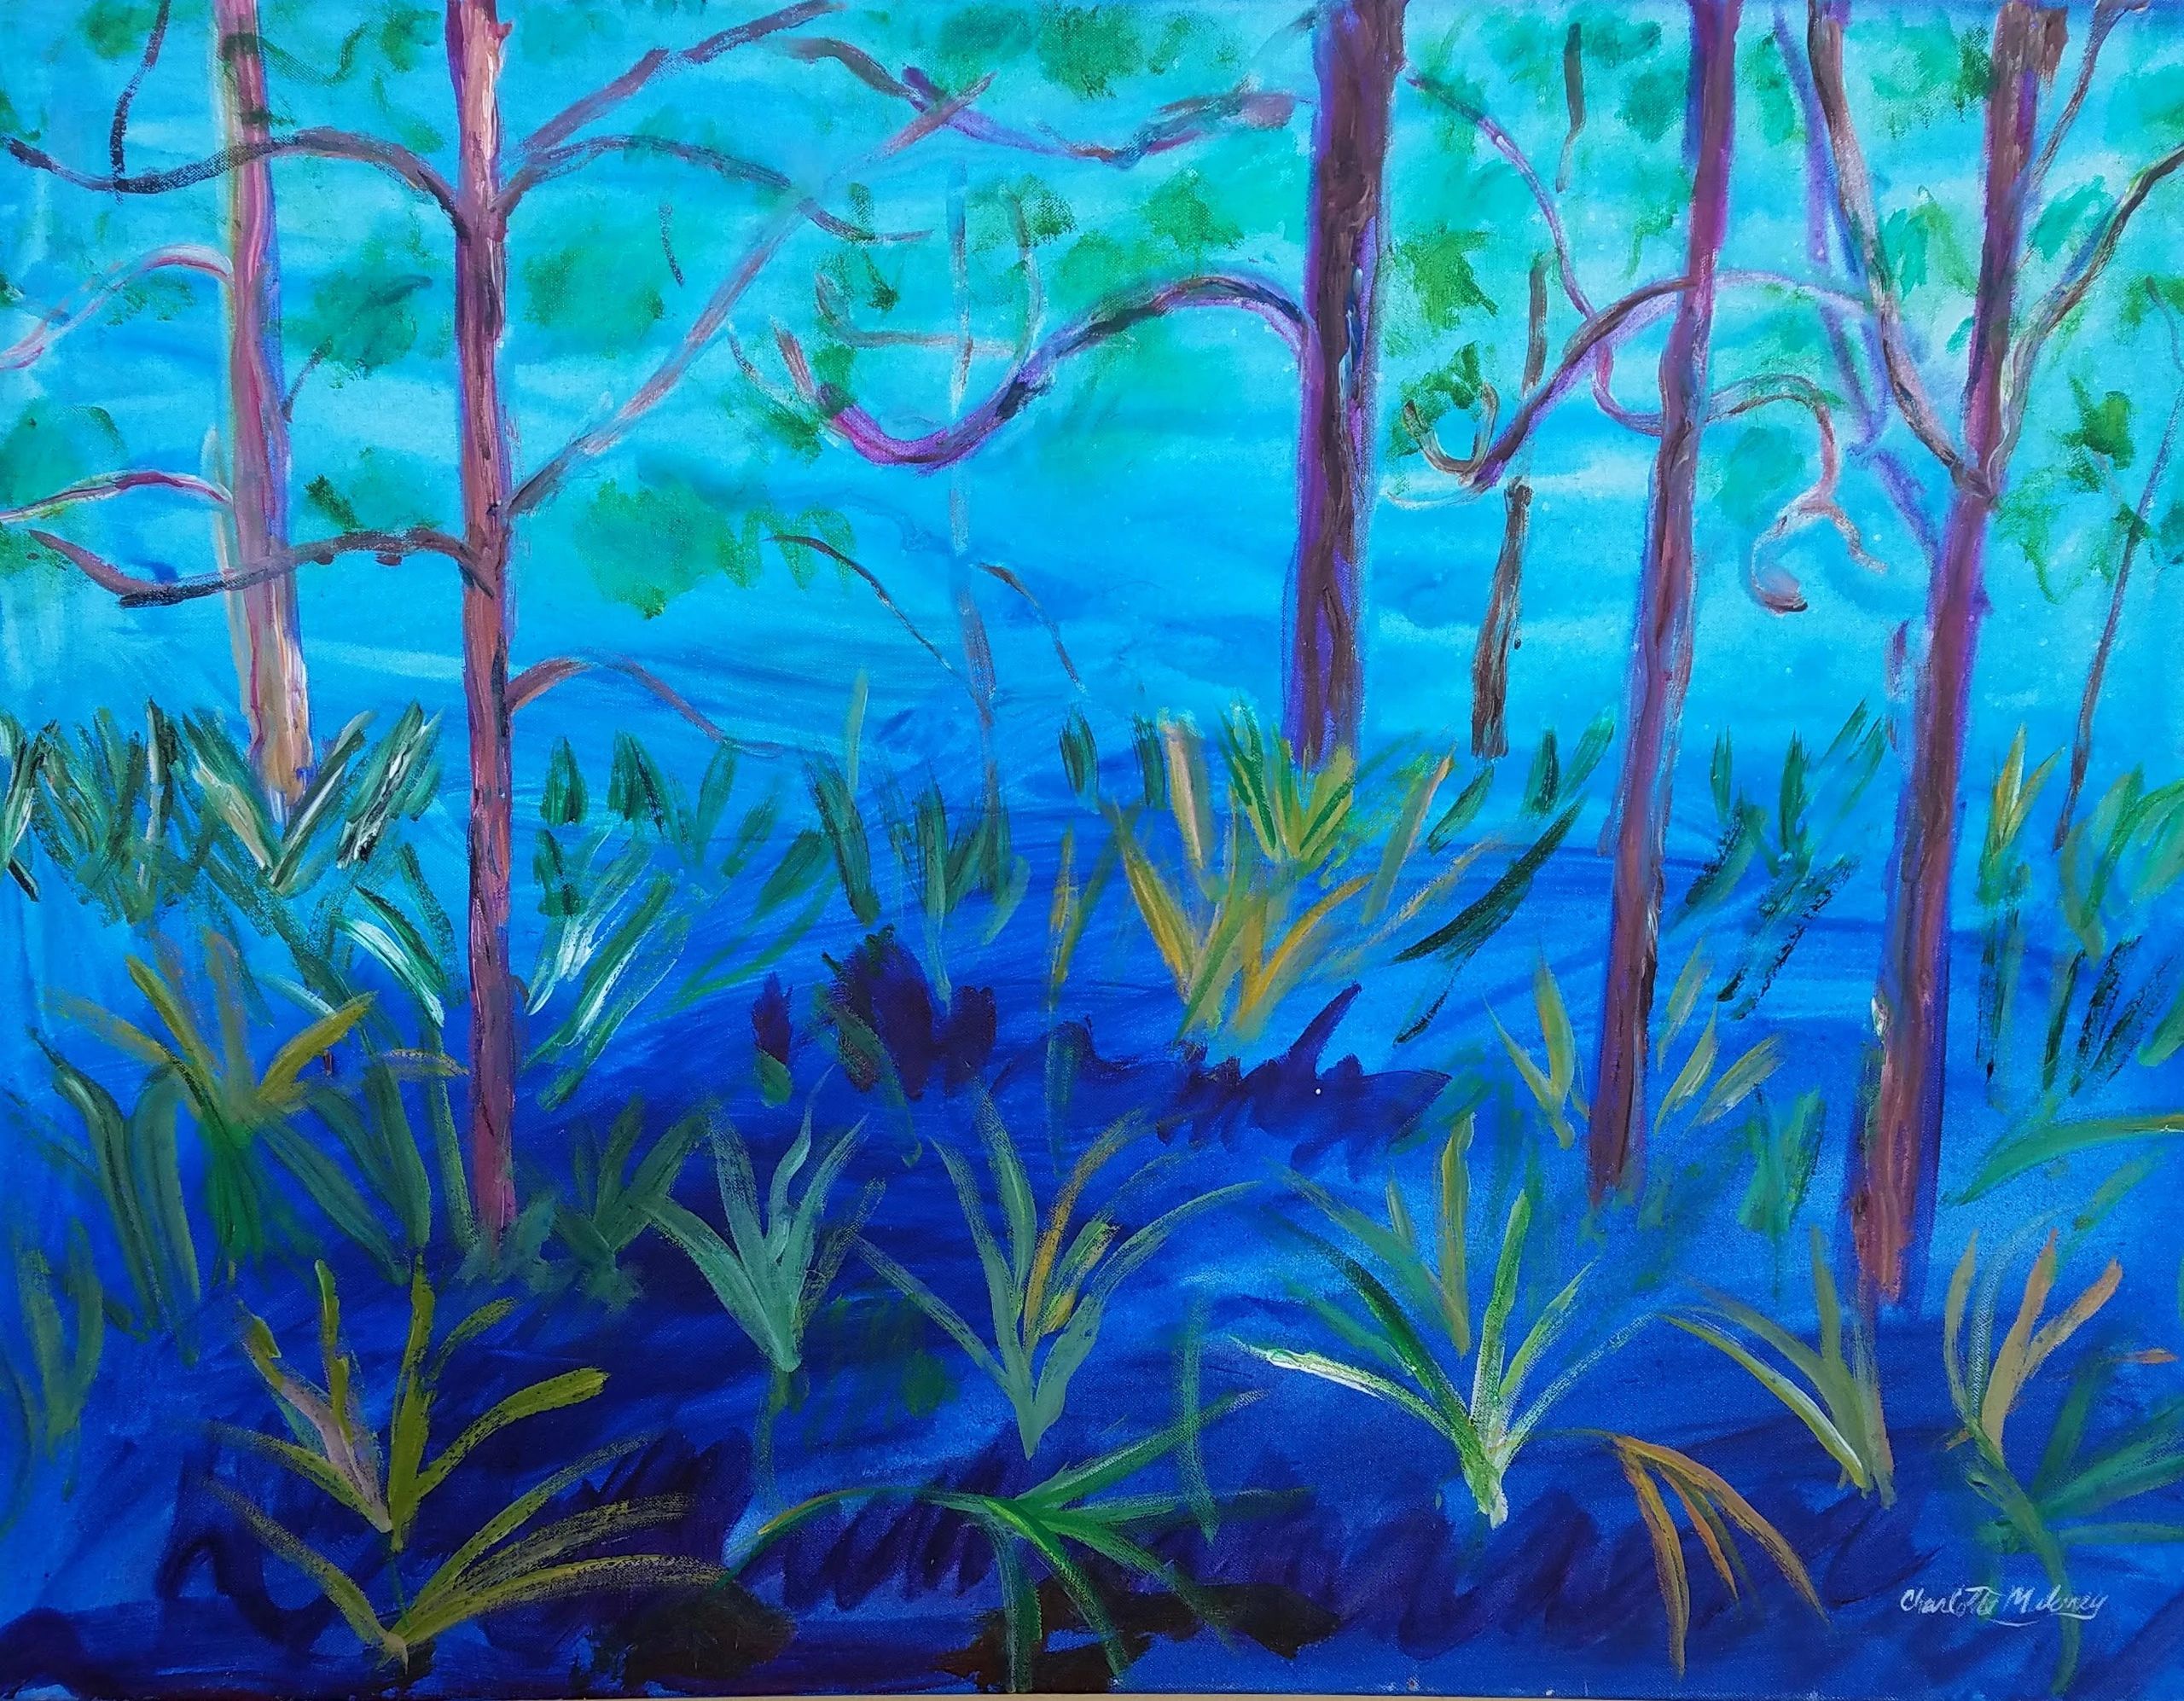 Acrylic on canvas, 30” x 40”, subject matter is Florida Pinetrees.